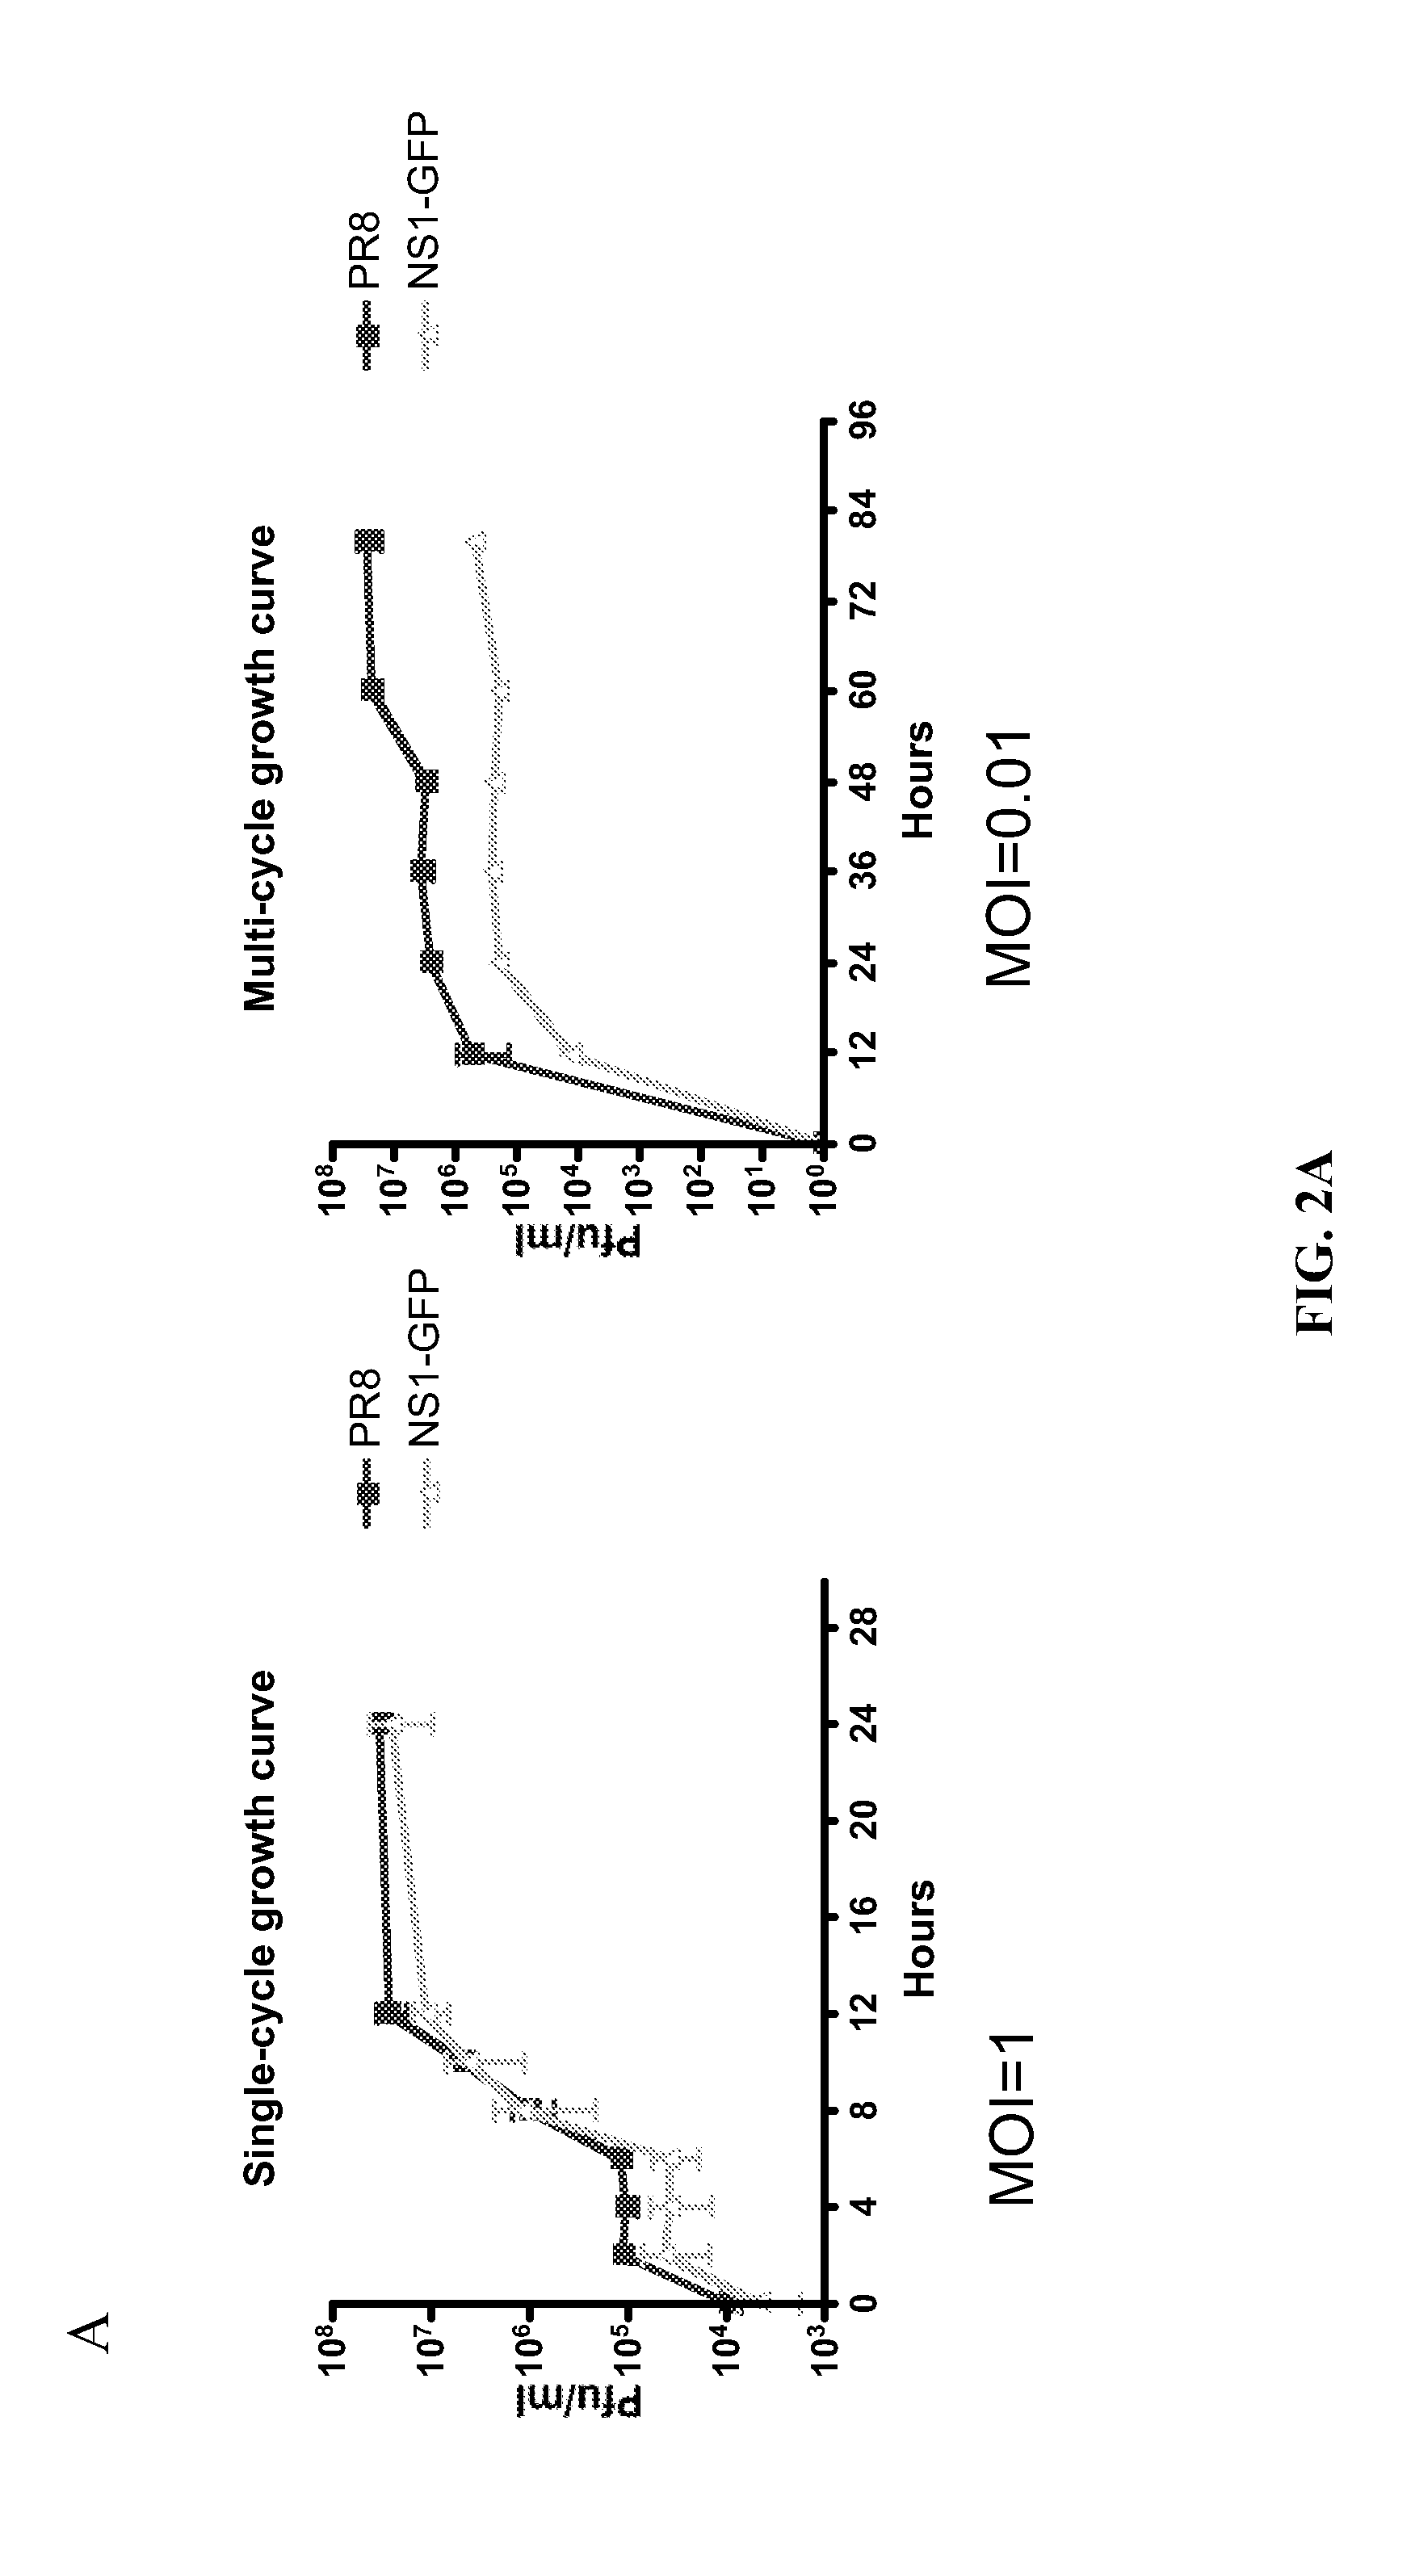 Recombinant influenza viruses and uses thereof